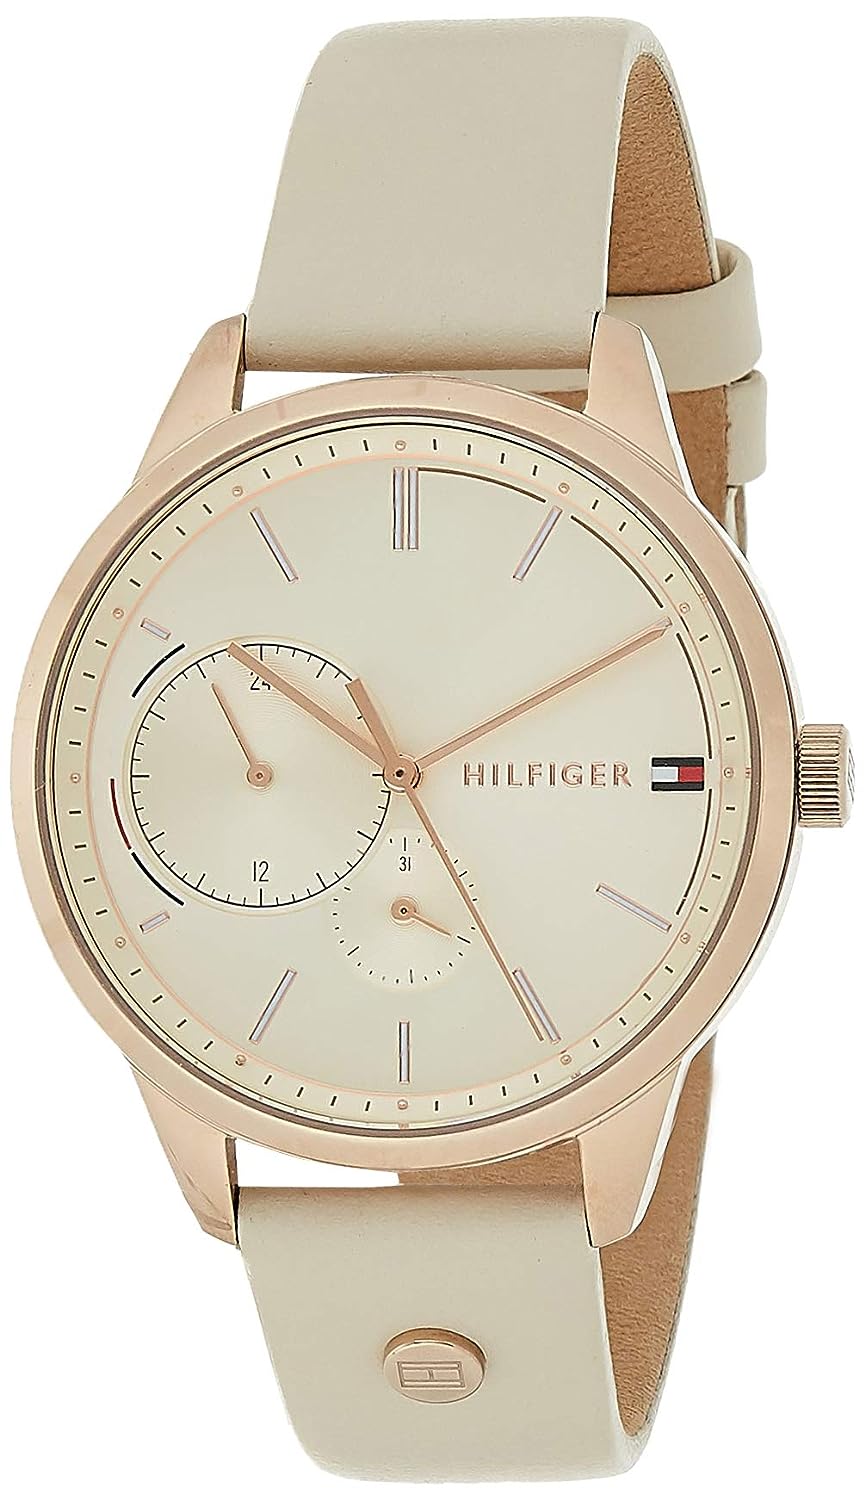 Tommy Hilfiger Women's Multi-Dial Quartz Watch with Leather Strap TH 1782022